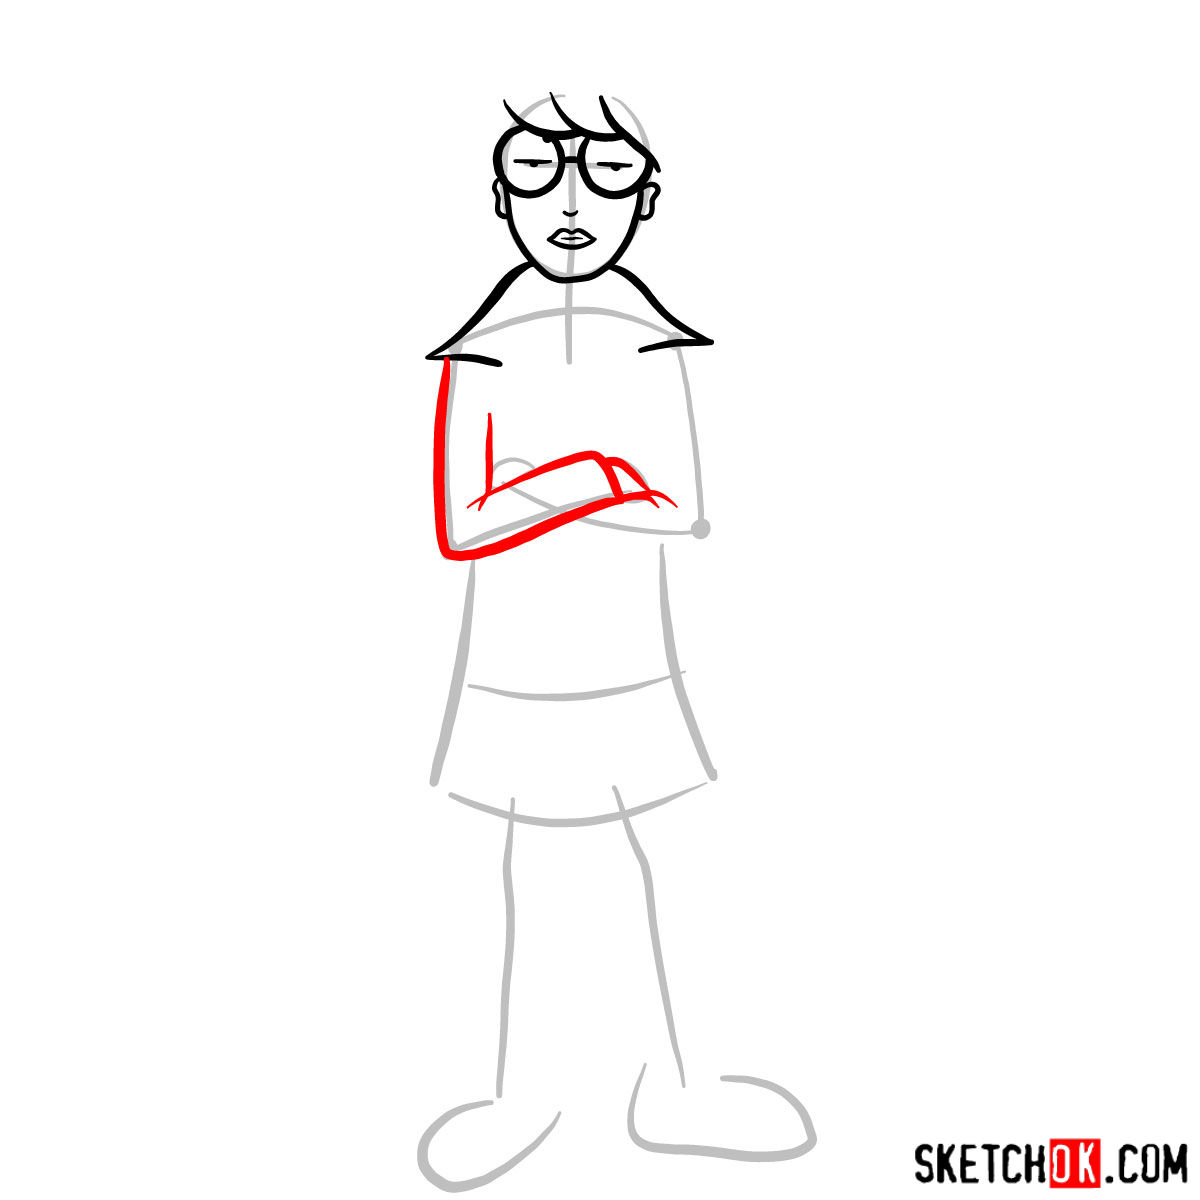 How to draw Daria - step 05